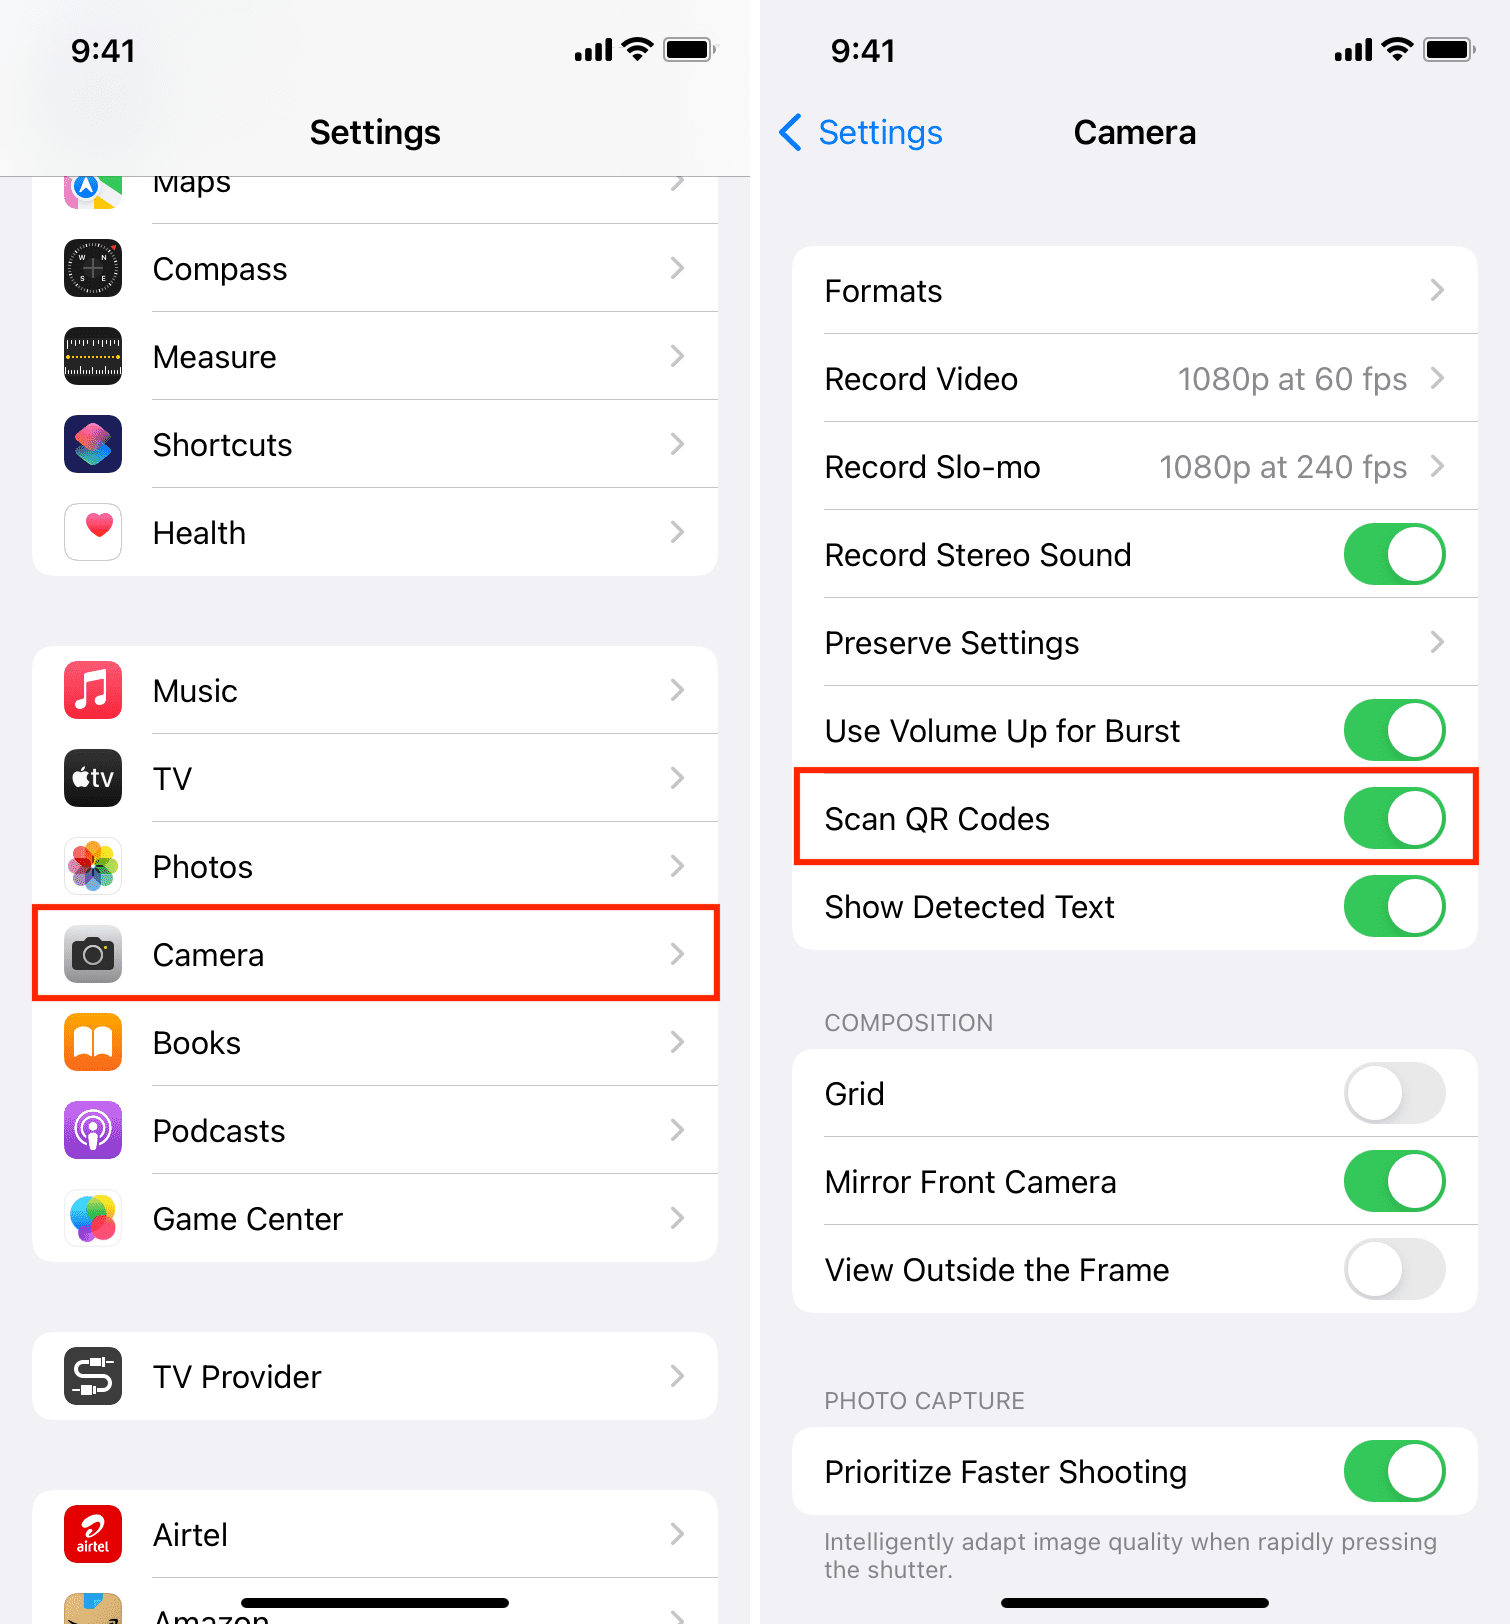 Enable Scan QR Codes option in iPhone Camera settings